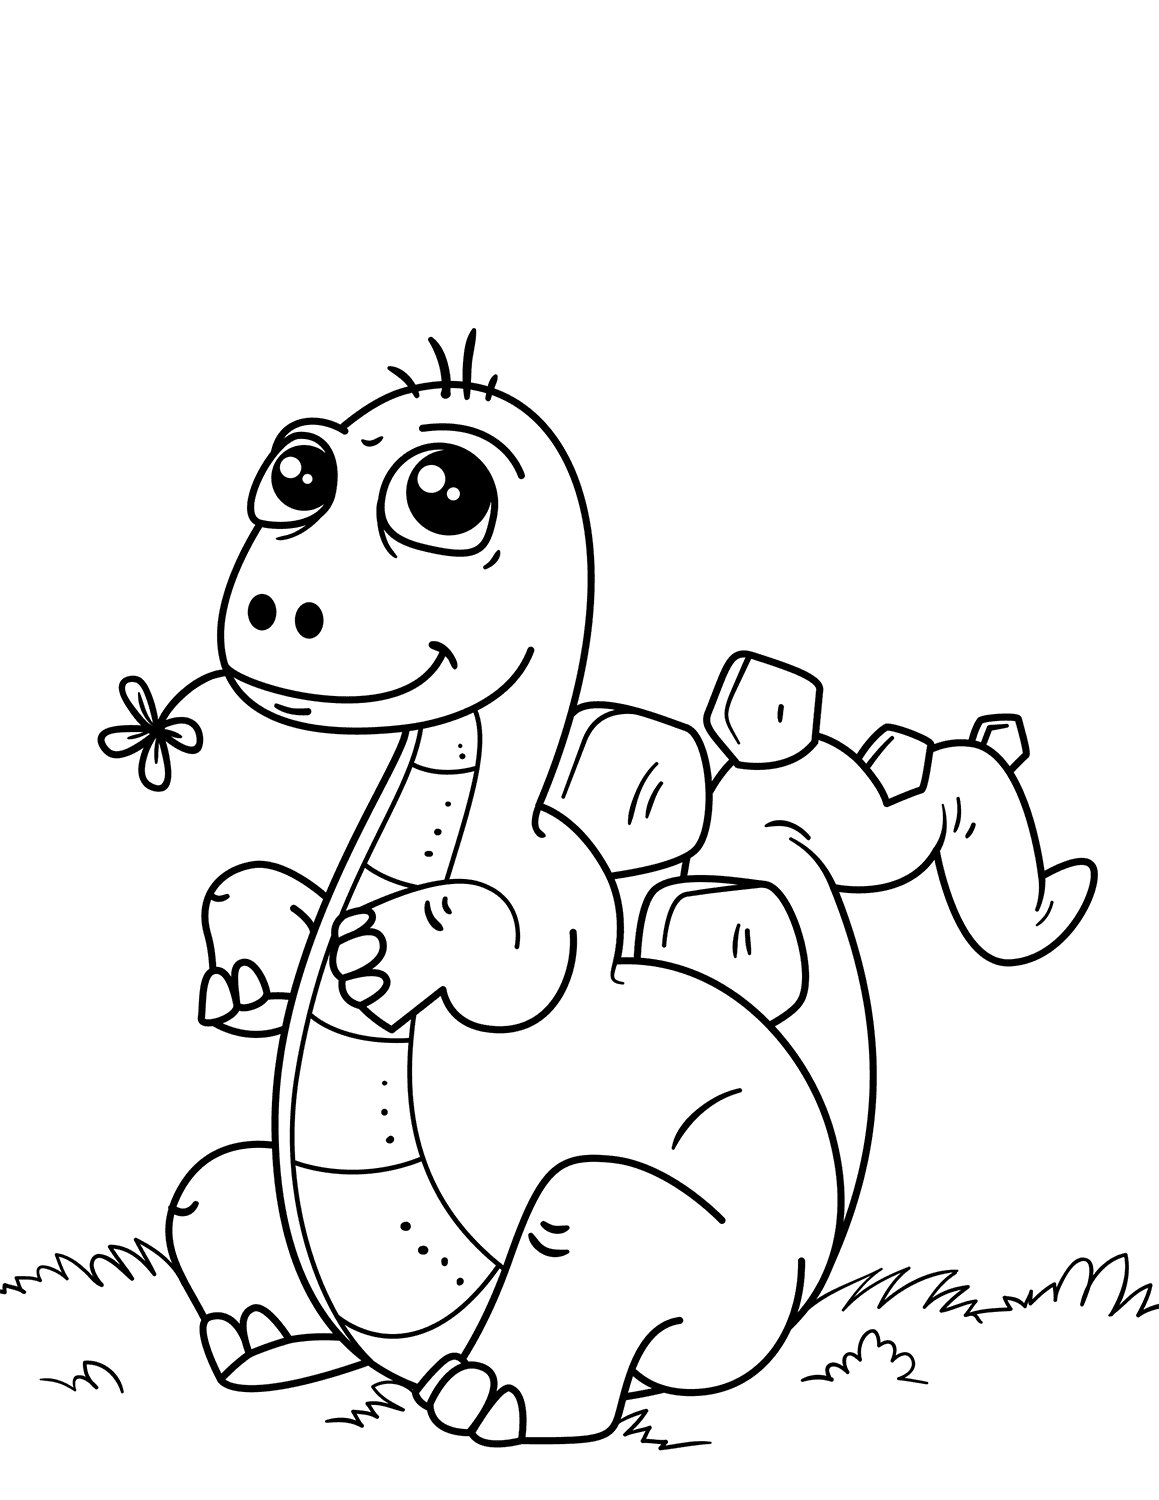 Cute Little Dinosaur Coloring Page